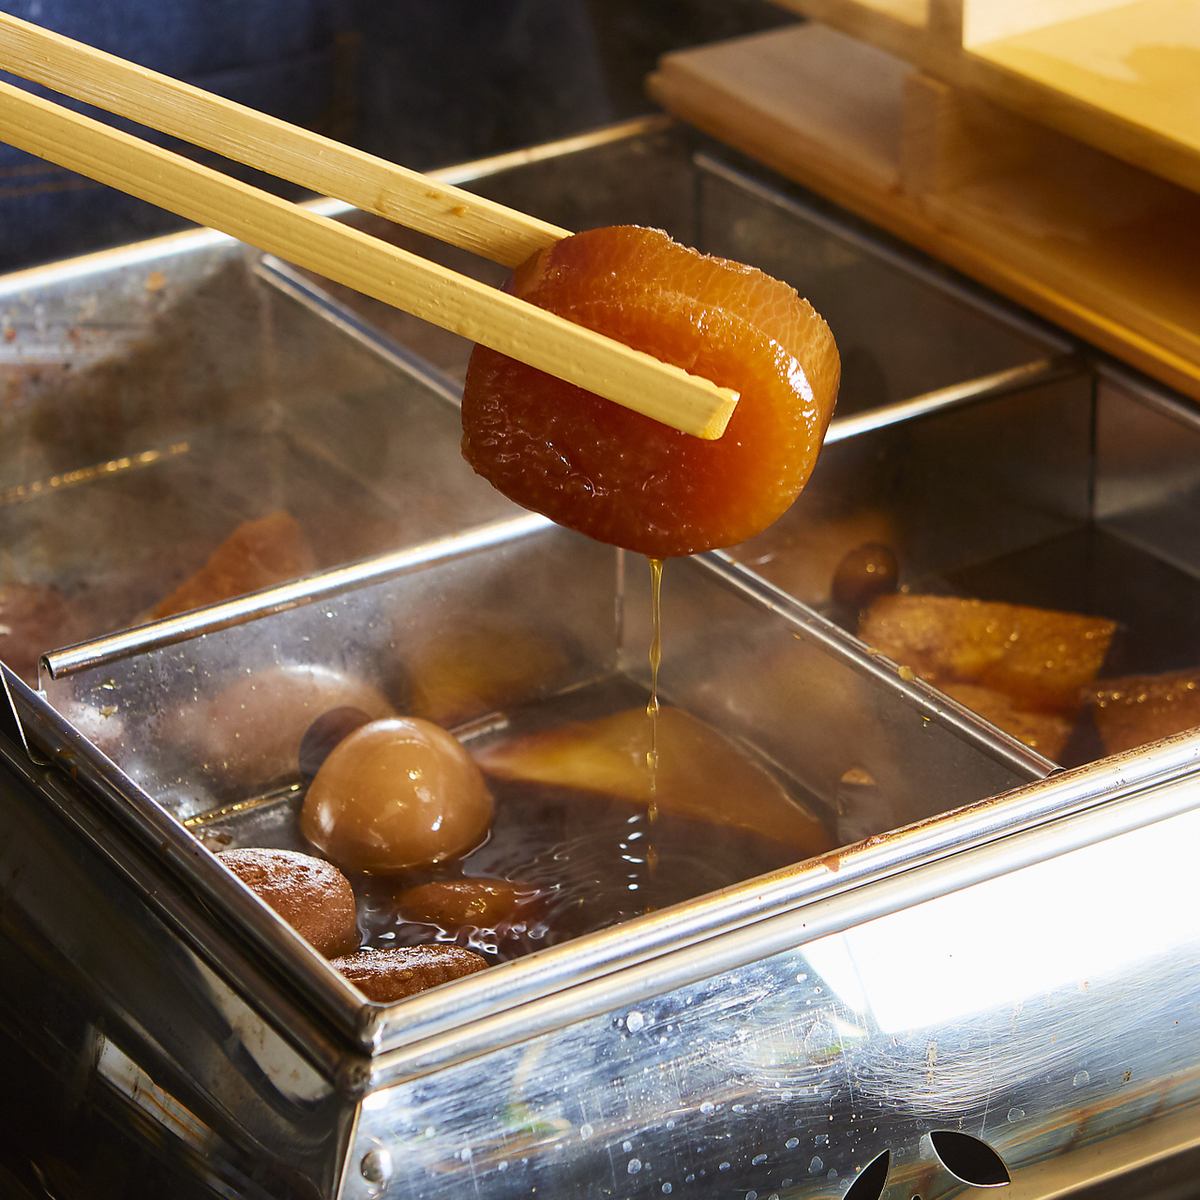 A one-cup ponshu that goes perfectly with the sour oden!